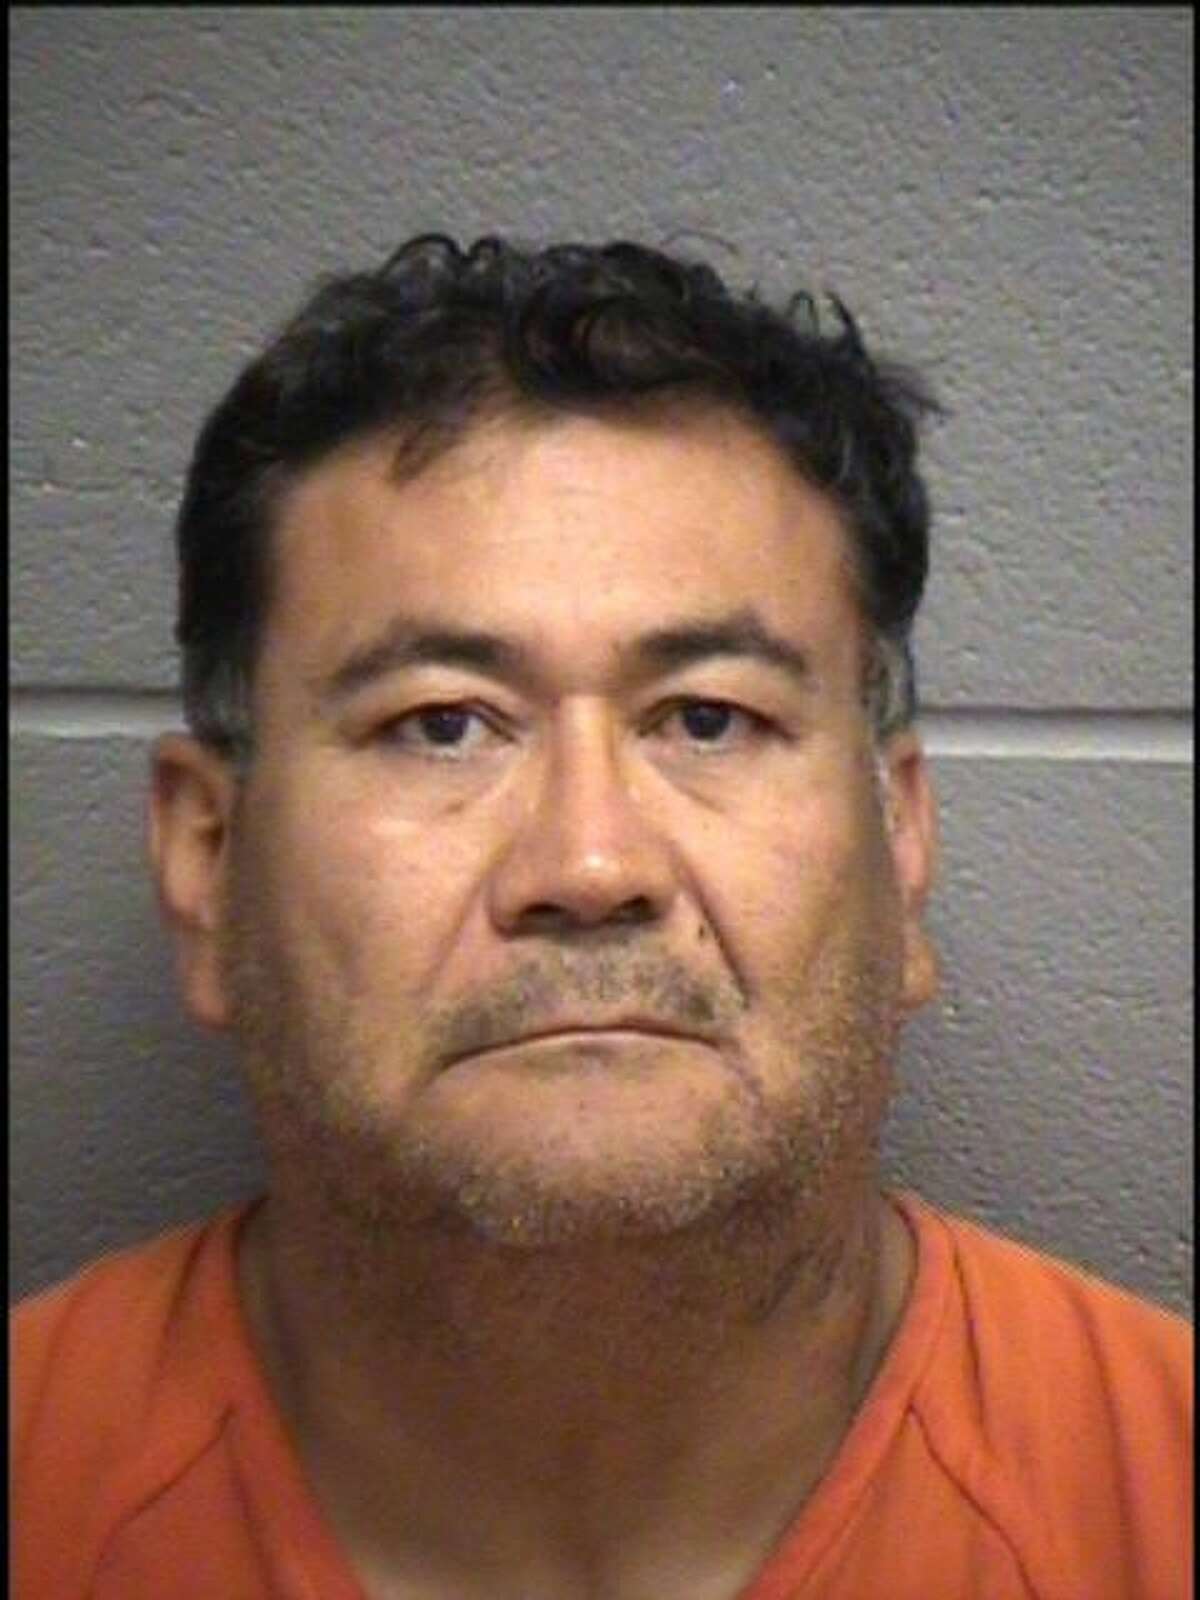 Martin Luis Mungia, 53, man was arrested last month after allegedly running over a woman with a vehicle.Mungia was charged with a second-degree felony of aggravated assault with a deadly weapon on May 28. Bond information was not available on Tuesday.Police were called to the intersection of Downing Avenue and North Midland Drive in reference to a traffic incident. A woman was found on the passenger side of a pickup with a large wound on her left foot and blood on the vehicle’s floor. An officer also observed she had large burns, most likely “road rash,” according to the arrest affidavit.The driver, Mungia, said the woman jumped from the vehicle because she was mentally unstable. He was detained after witnesses said the woman was shoved, according to the affidavit.Mungia and the woman were arguing and he said she threatened to hit him with a rock if he did not pull over, according to the affidavit.The woman opened the door, held on to the outside of the pickup and jumped. She landed in the street and Mungia said he ran over her with the rear right tire, according to the affidavit.Two witnesses said the woman was hanging off the side of the truck. When the woman was attempting to get out of the vehicle, witnesses heard her scream for help and the sound of the engine accelerating. One witness saw the truck gain speed, according to the affidavit.The woman attempted to run while holding on to the truck, but could not hold on and fell. The rear right tire ran over part of her body, according to the affidavit.If found guilty of a second-degree felony, Mungia could face up to 20 years in prison.